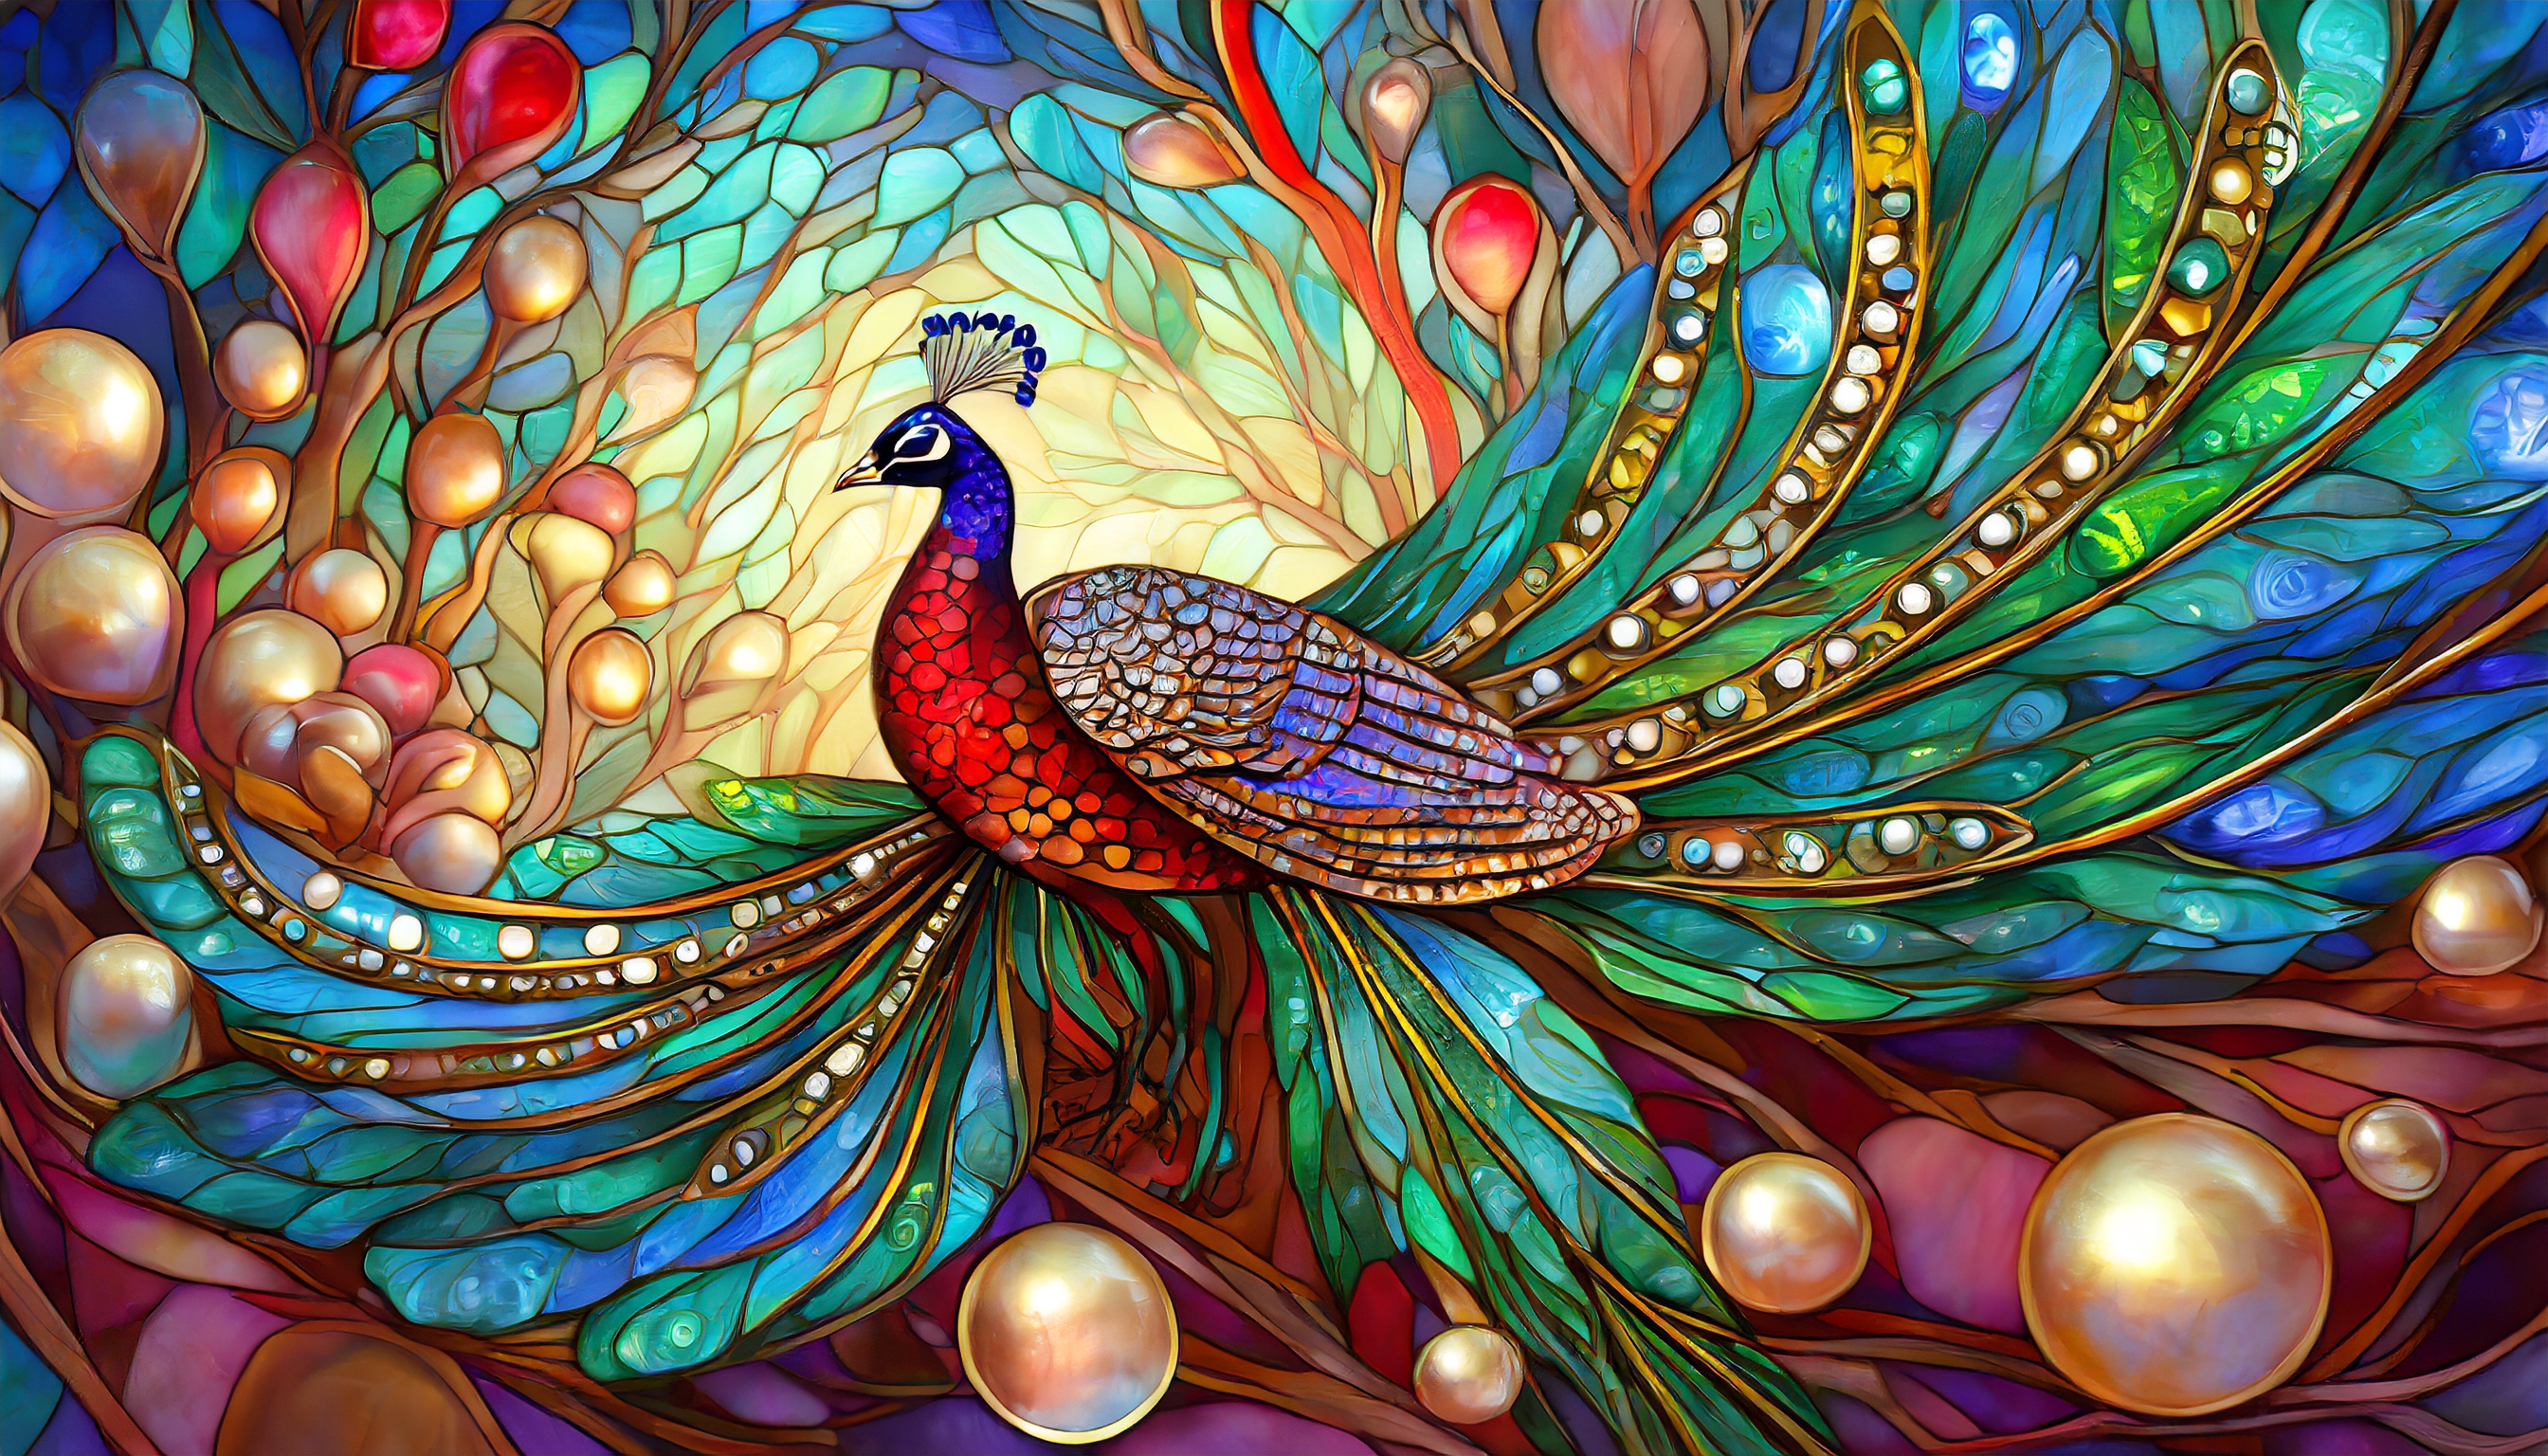 General 2688x1536 AI art digital art peacocks peacock feathers red stained glass